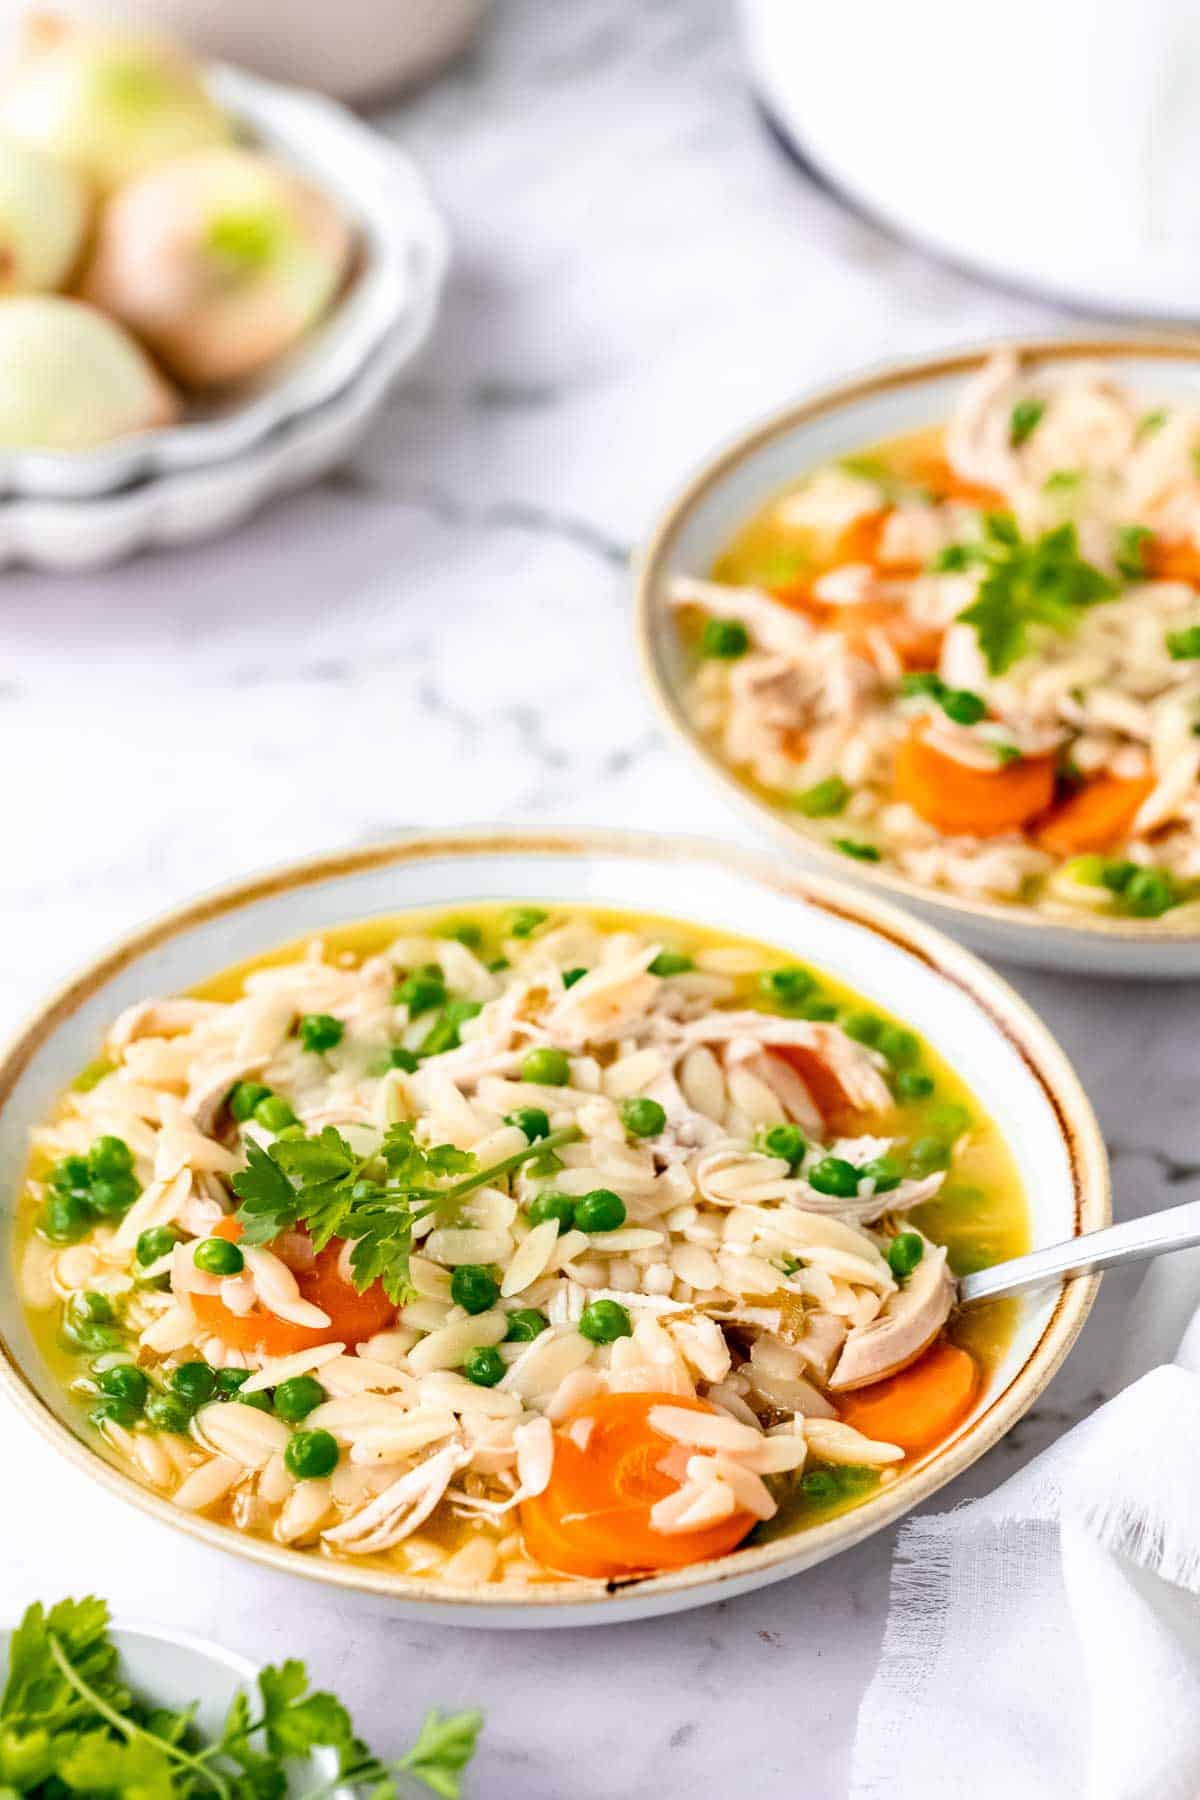 Two bowls of gluten-free chicken orzo stew side-by-side on a countertop.